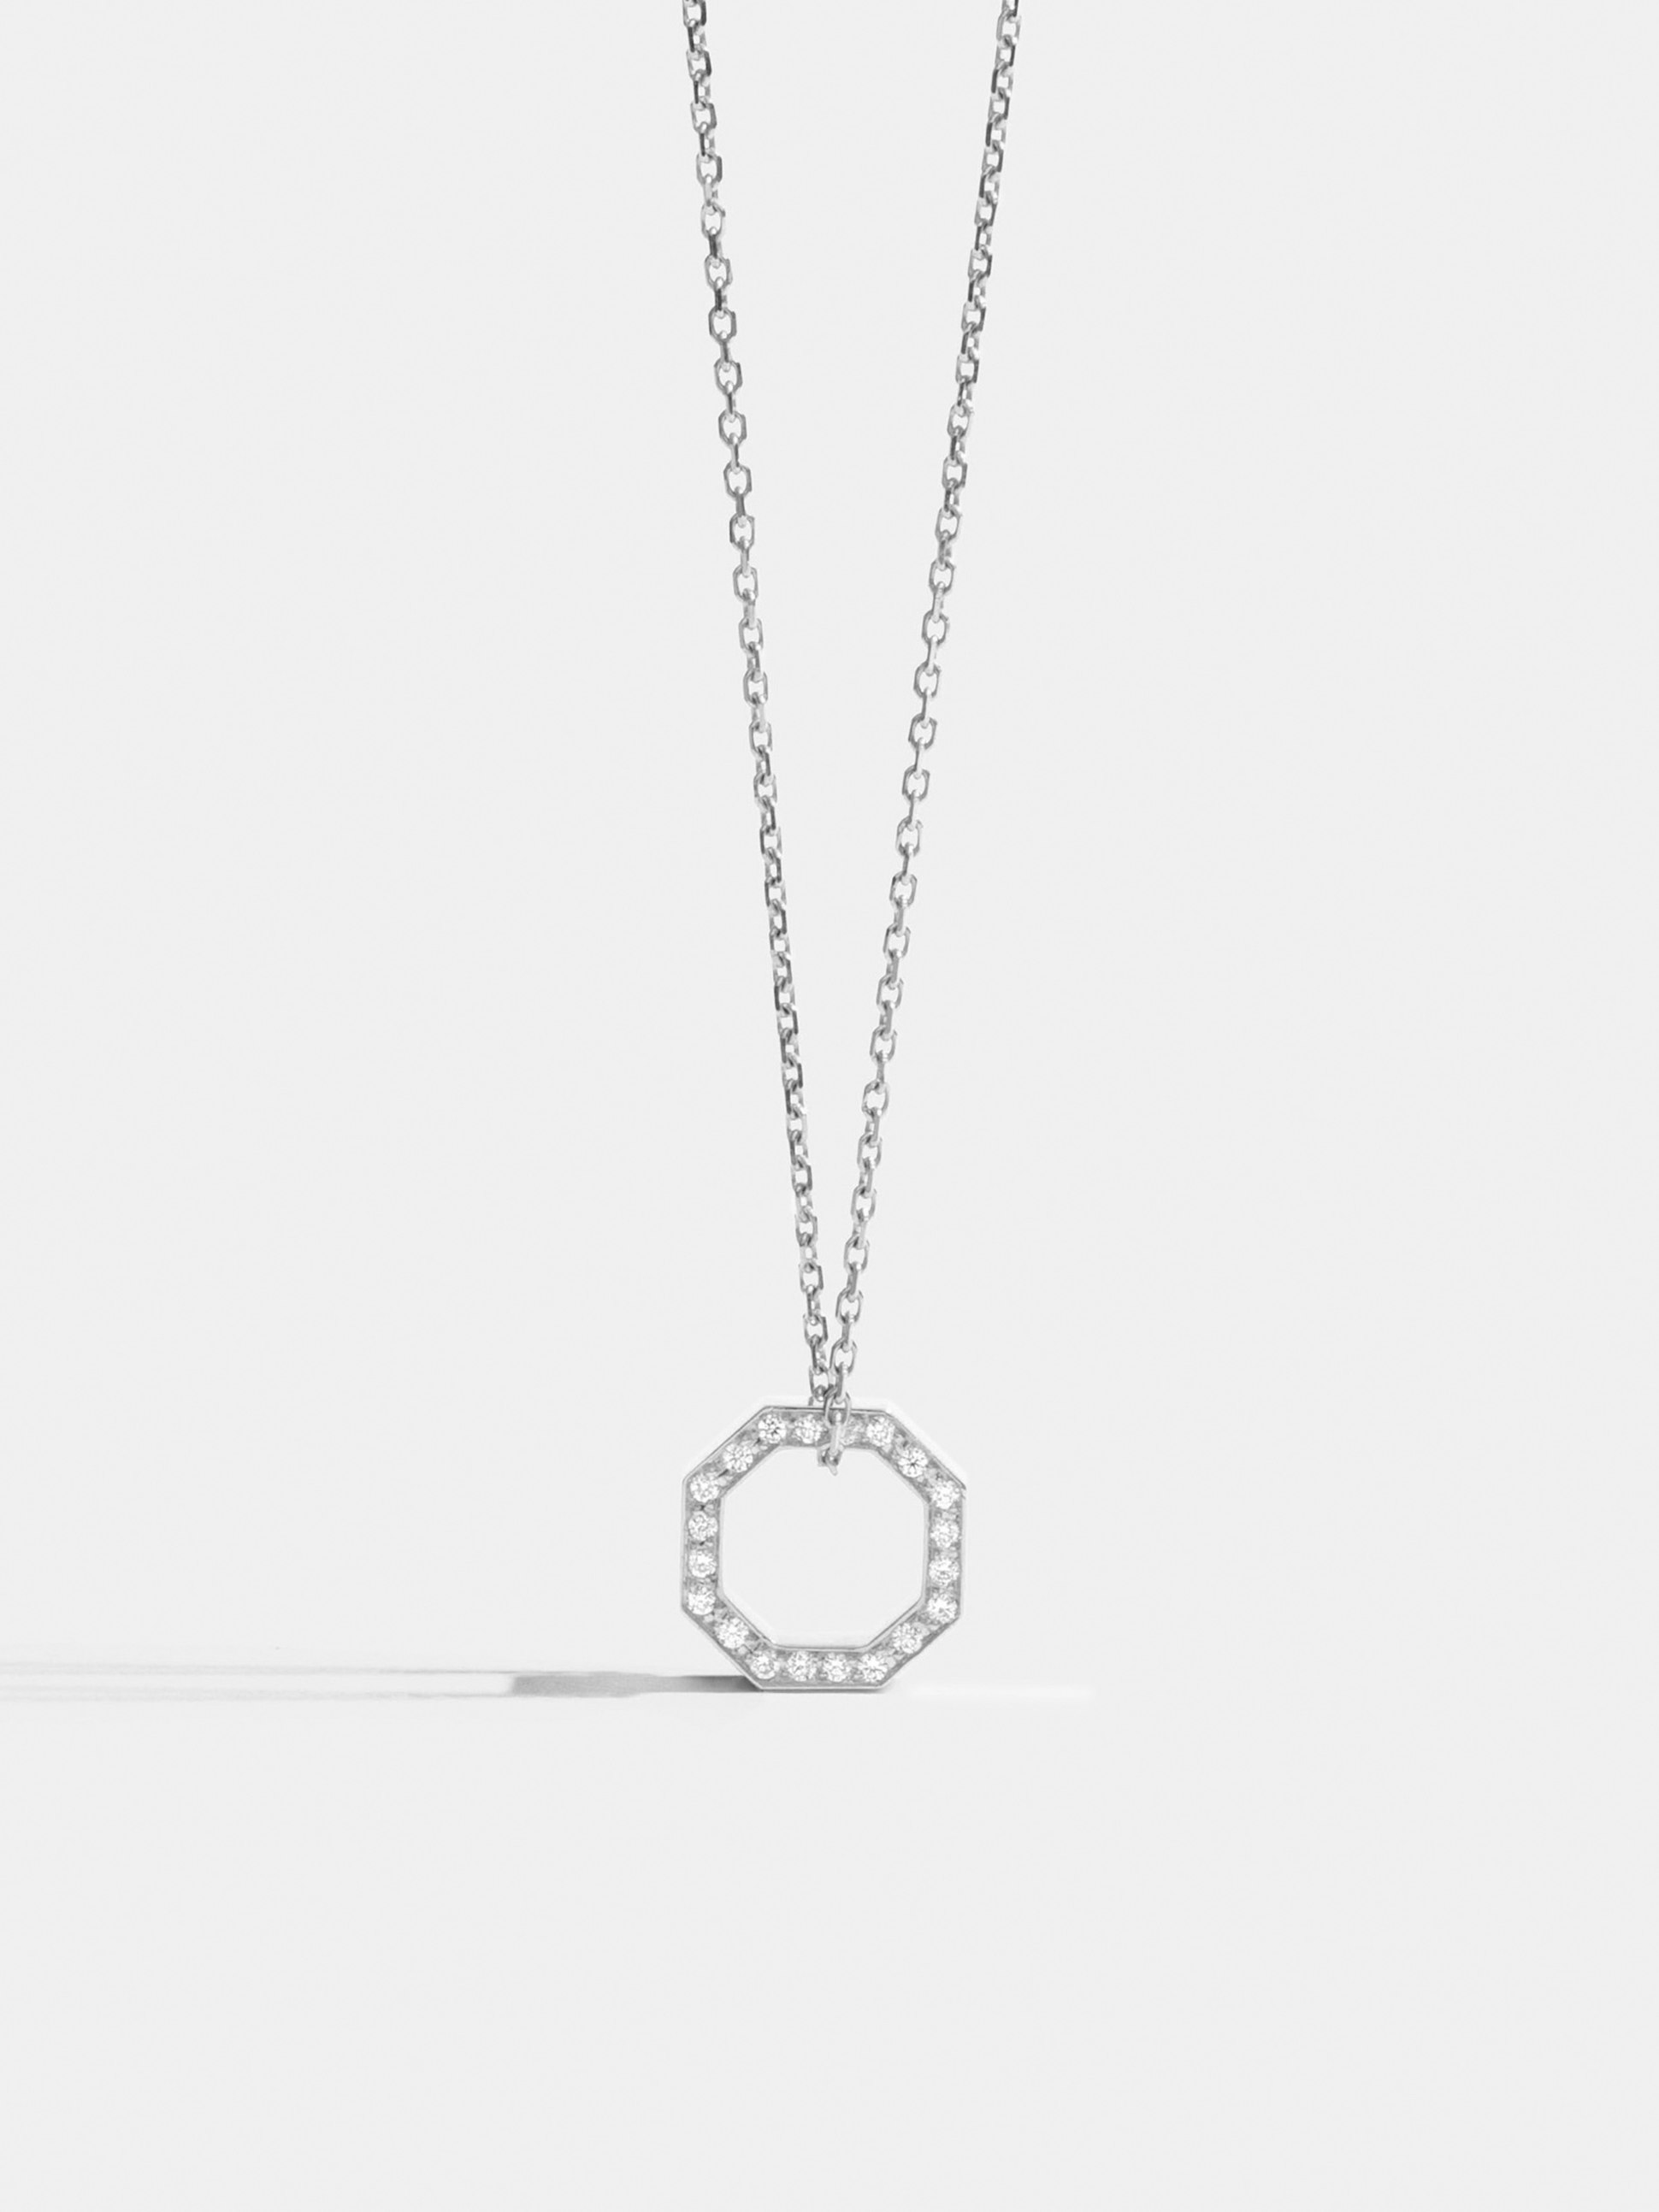 Octogone 10mm pendant in 18k Fairmined ethical white gold, paved with lab-grown diamonds, on a chain.